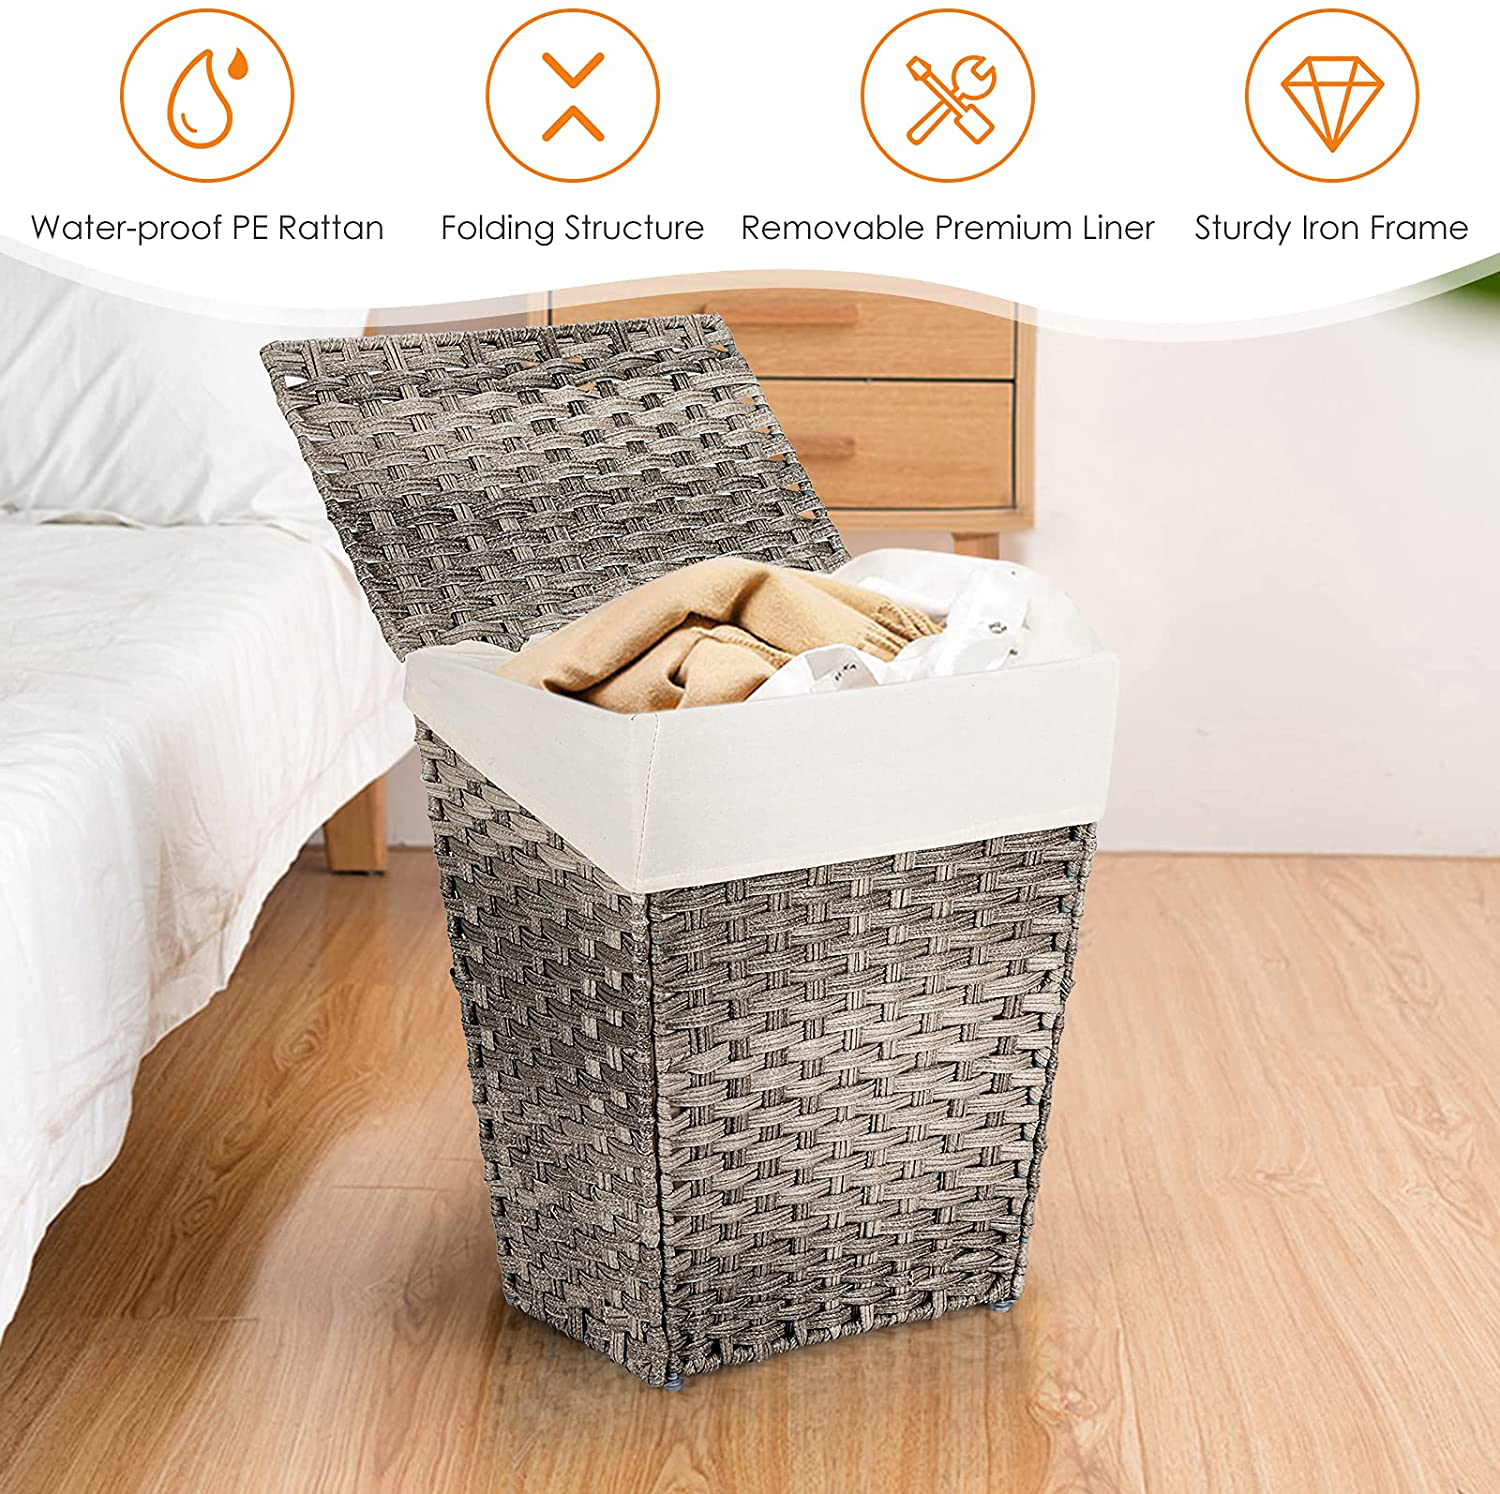  Handwoven Laundry Storage Basket with Lid 